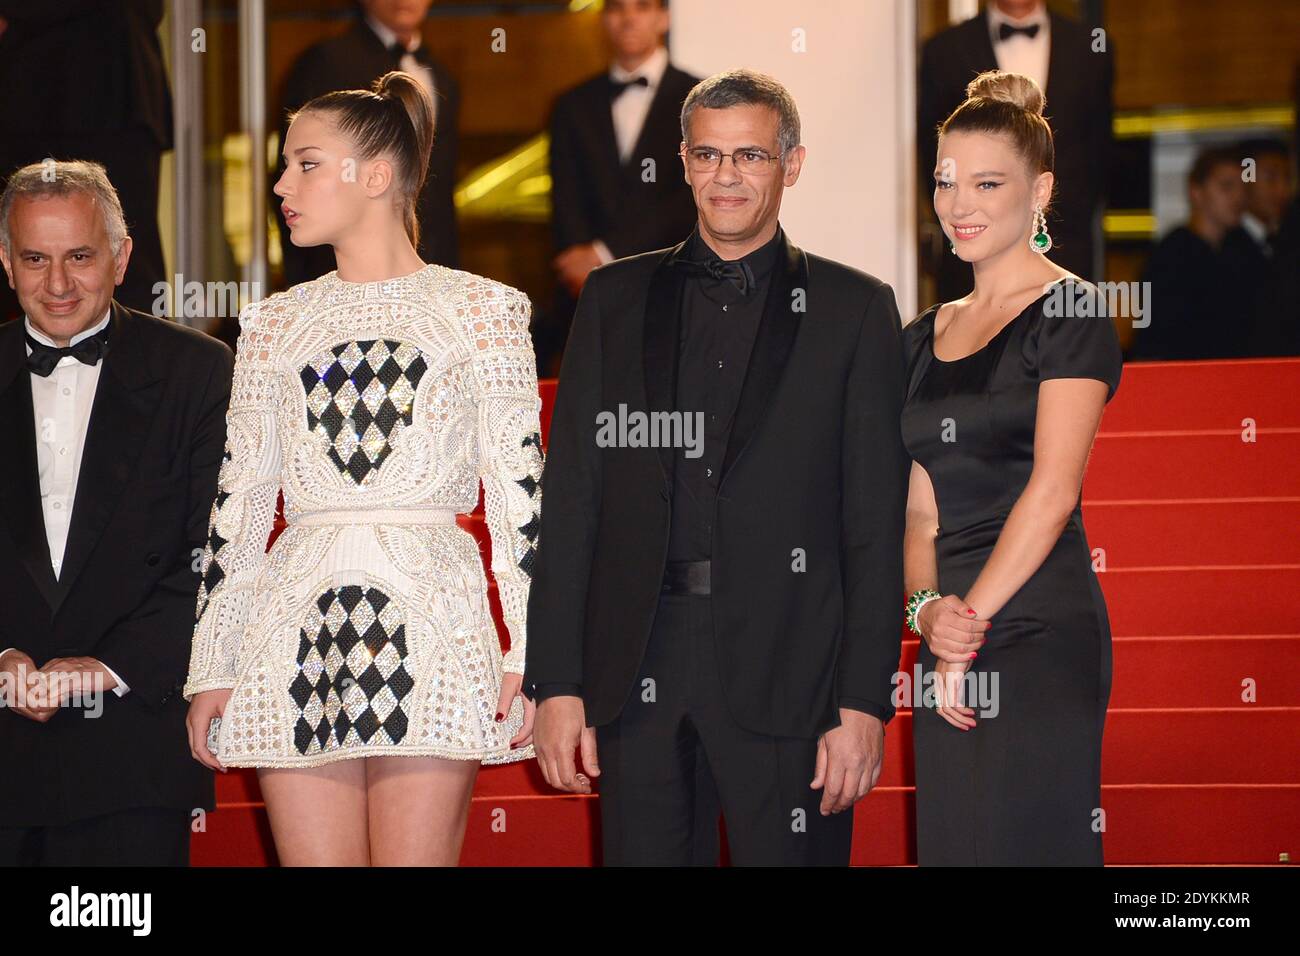 Director Abdellatif Kechiche, Lea Seydoux, Adele Exarchopoulos arriving for La Vie D'Adele screening held at the Palais Des Festivals as part of the 66th Cannes Film Festival in Cannes, France on May 23, 2013. Photo by Nicolas Briquet/ABACAPRESS.COM Stock Photo